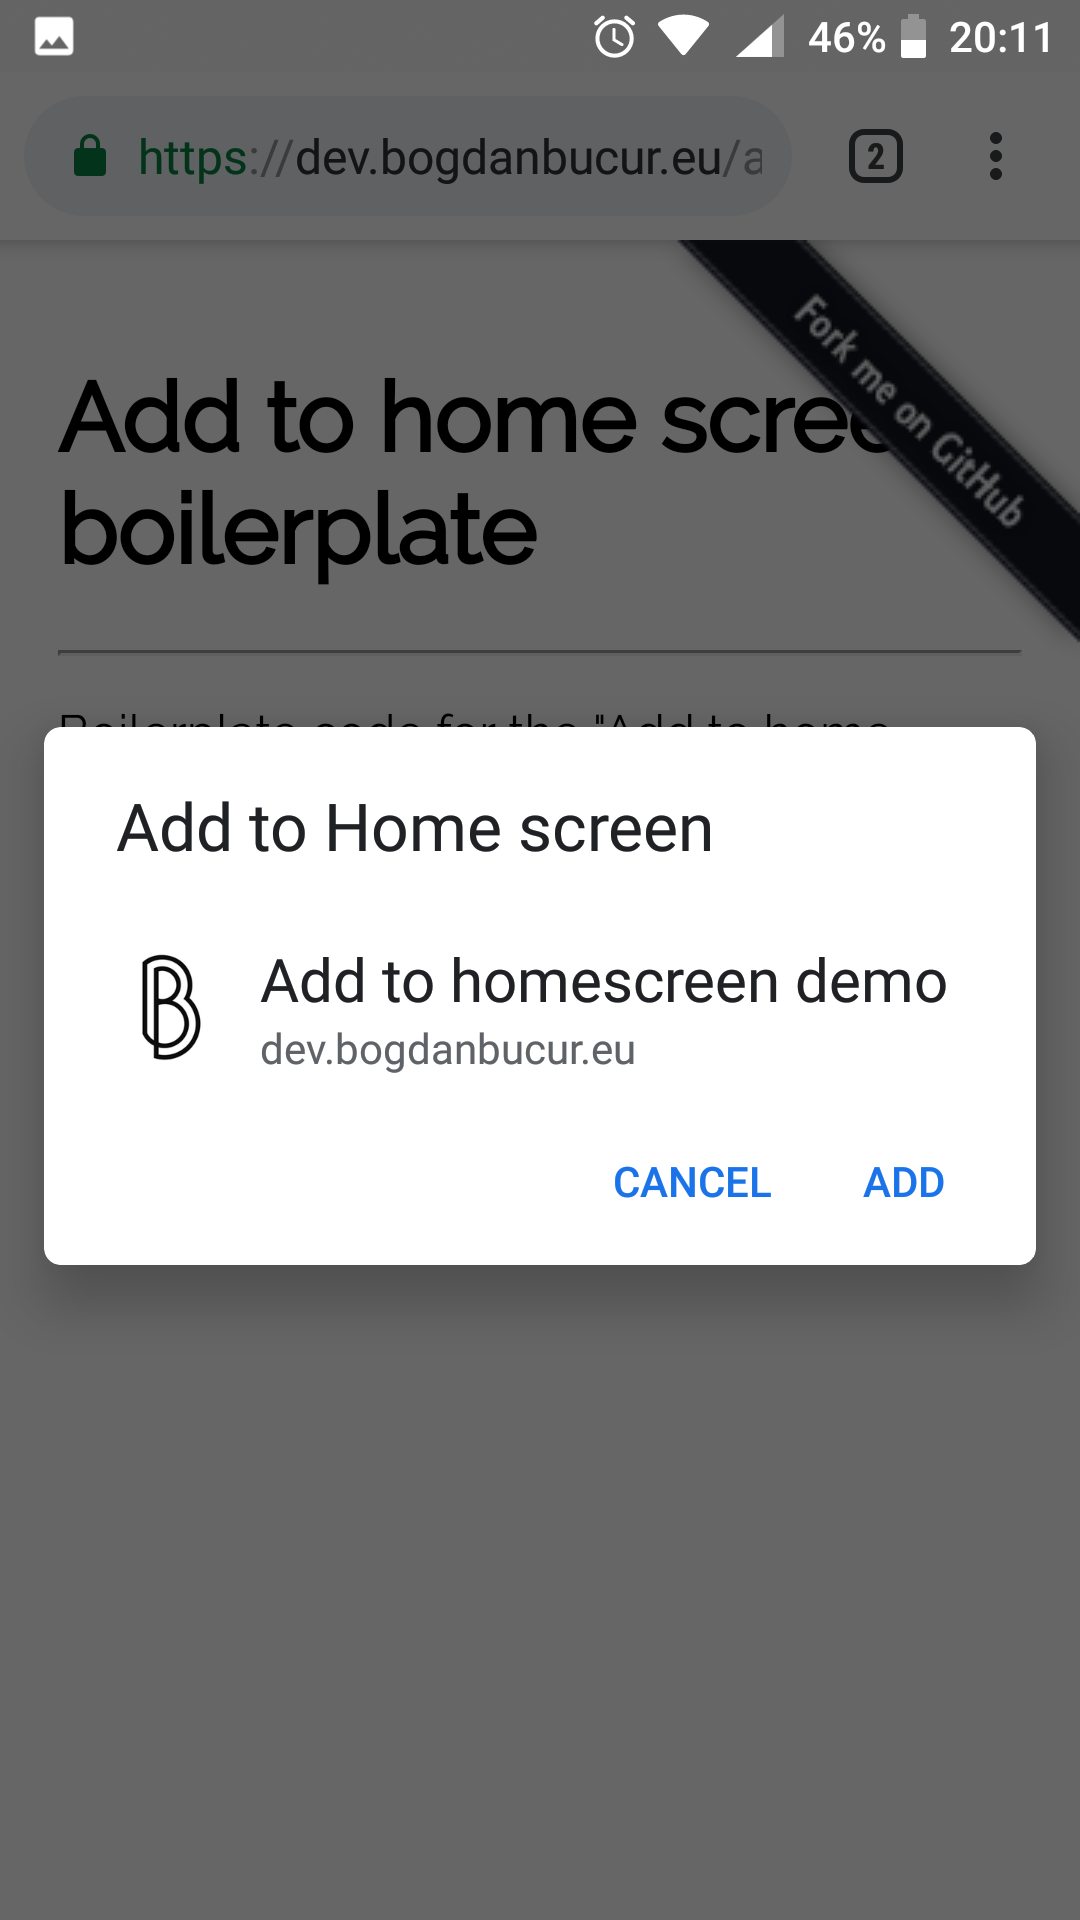 Add to home screen feature gotchas